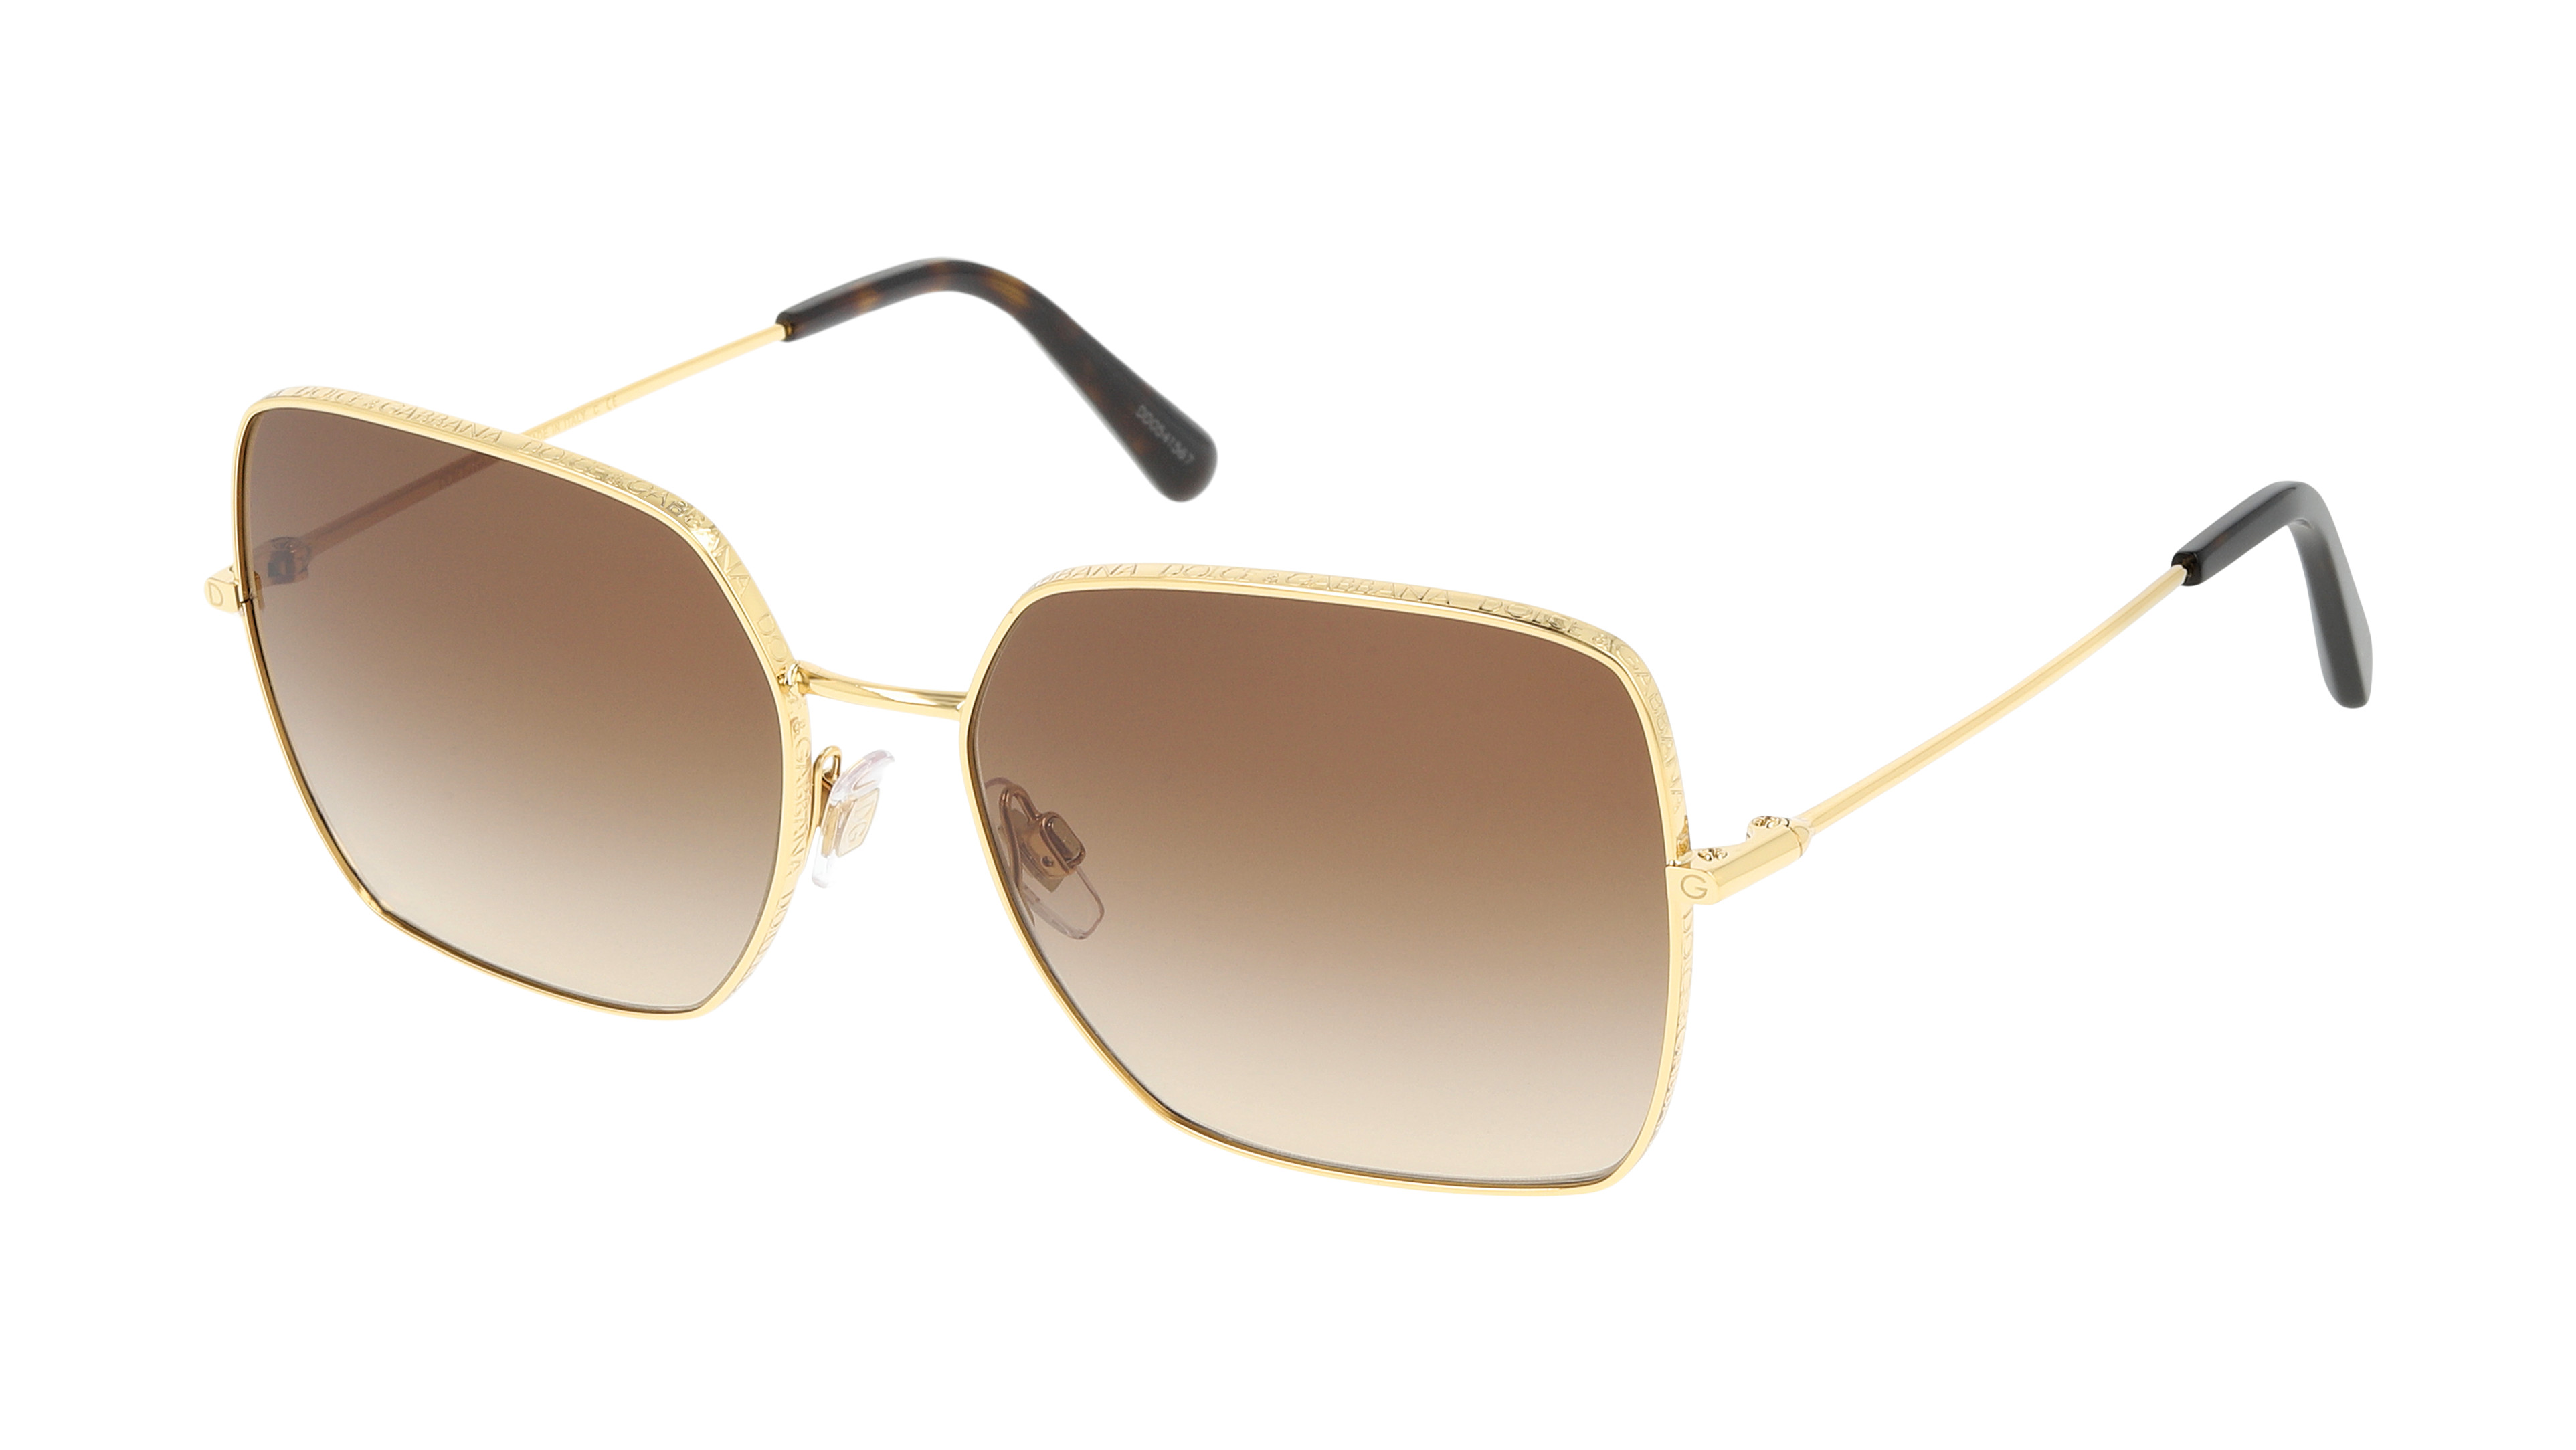 [products.image.angle_left01] Dolce&Gabbana 0DG2242 02/13 Sonnenbrille